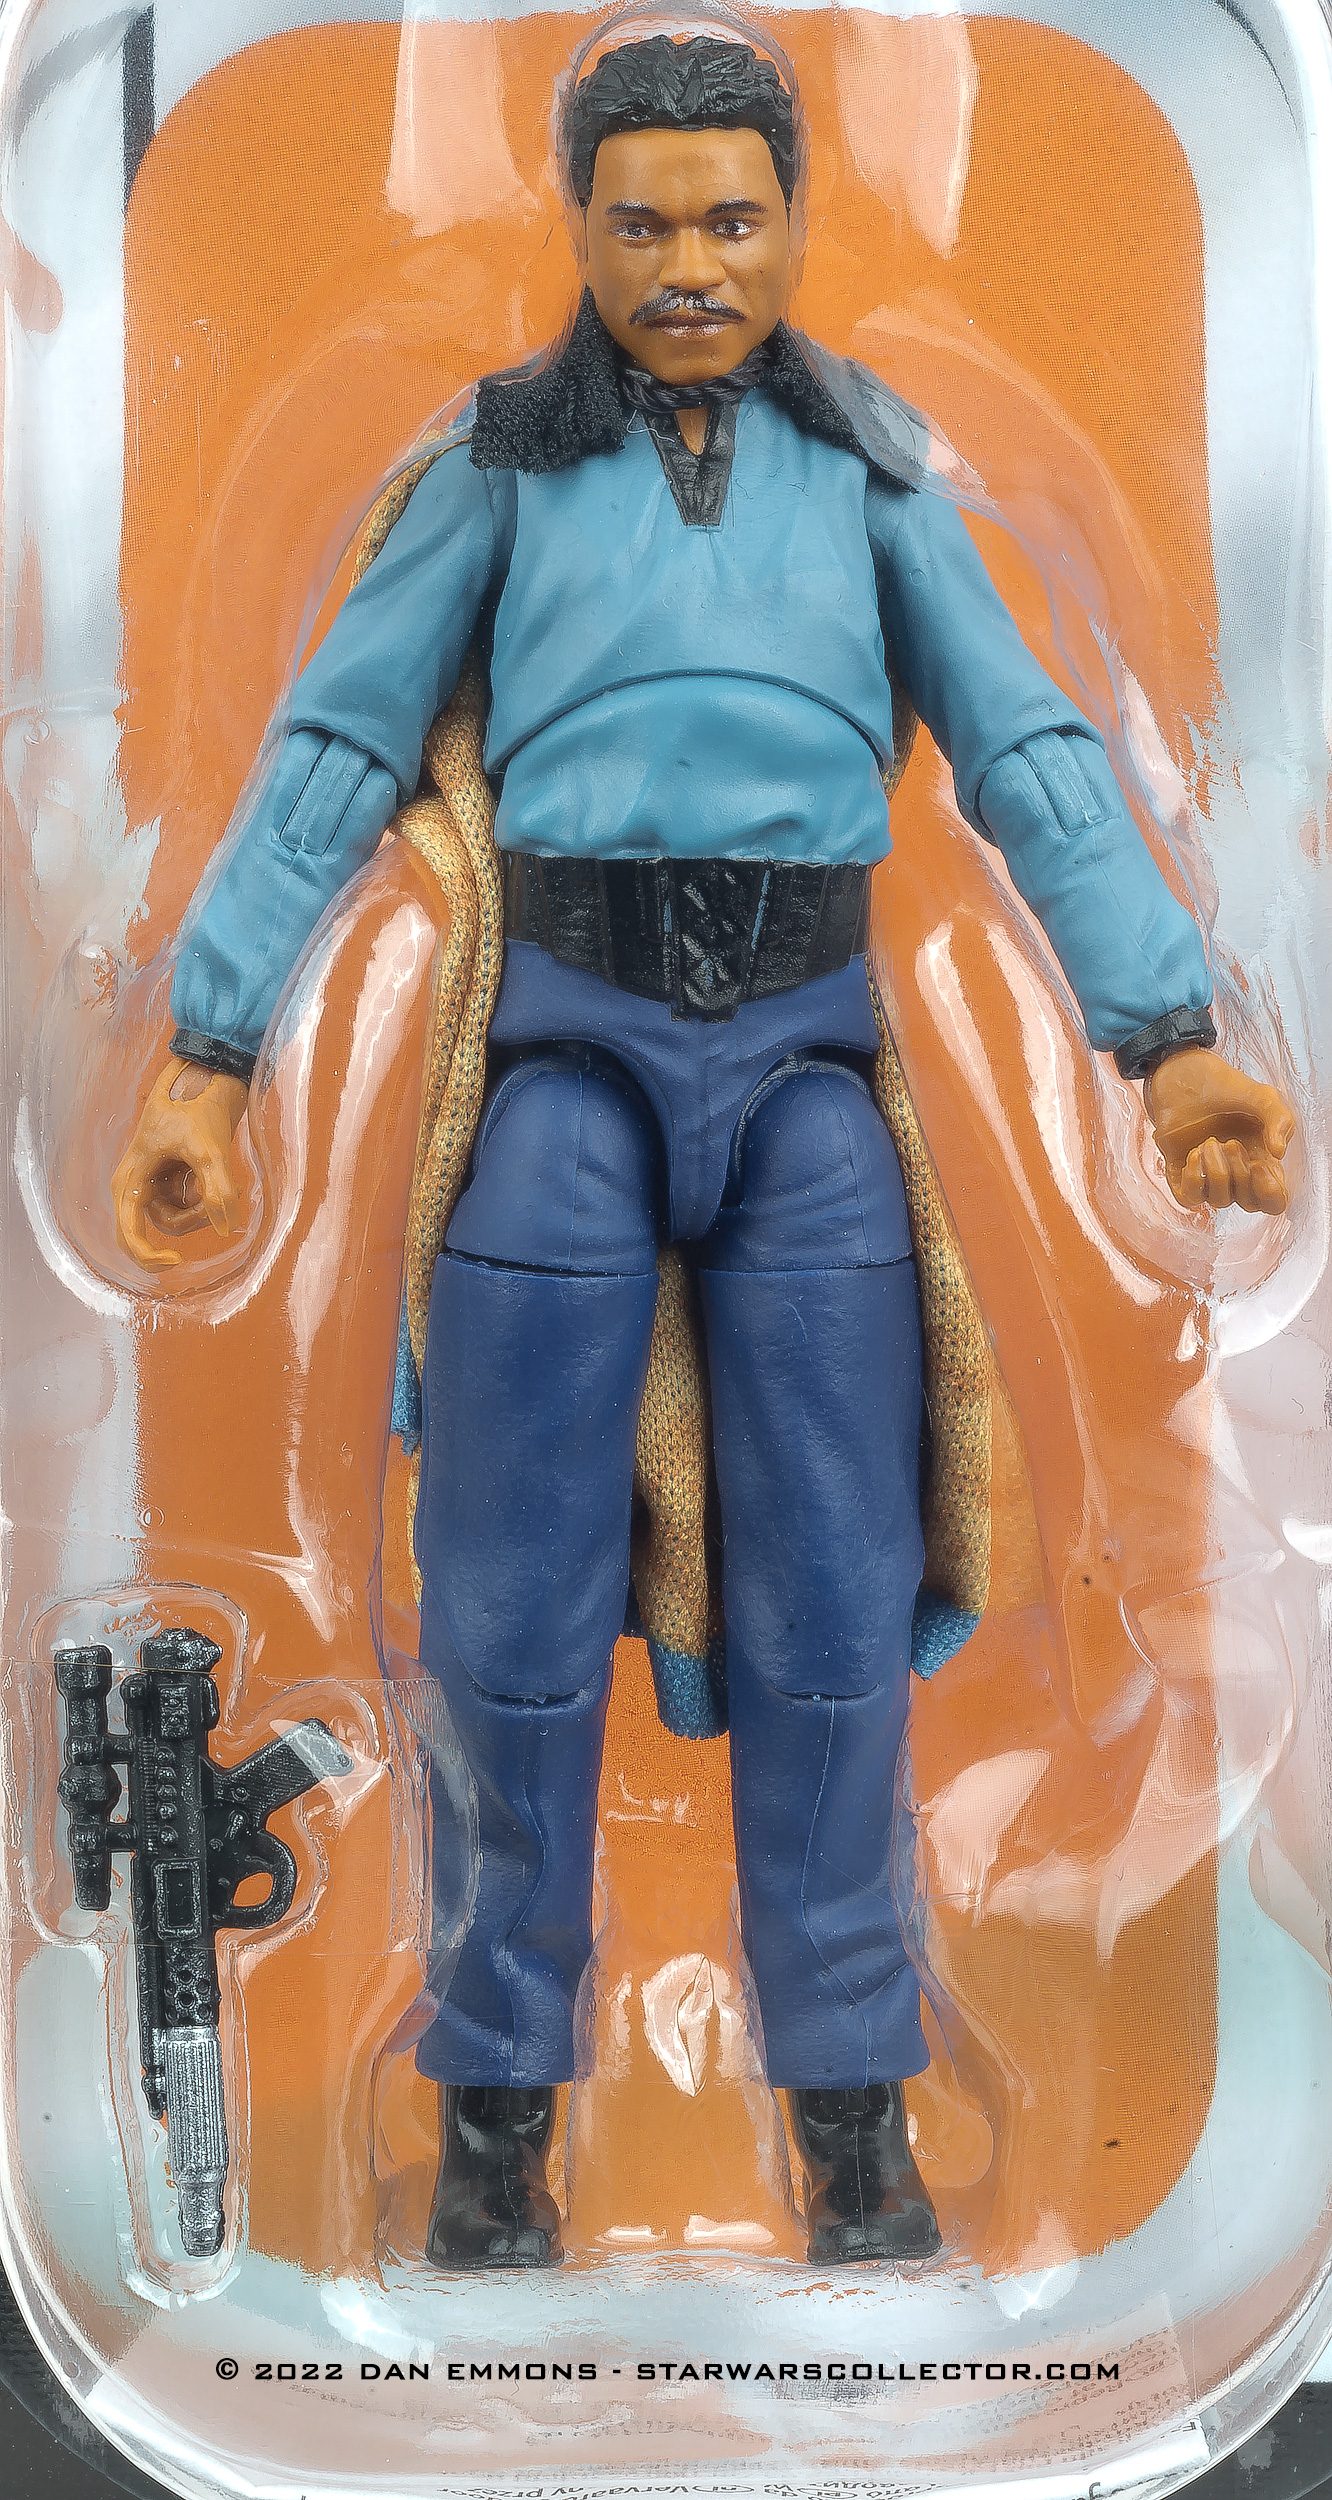 Did Hasbro Update The Gun Paint Deco For The Vintage Collection VC205 Lando Calrissian Figure?